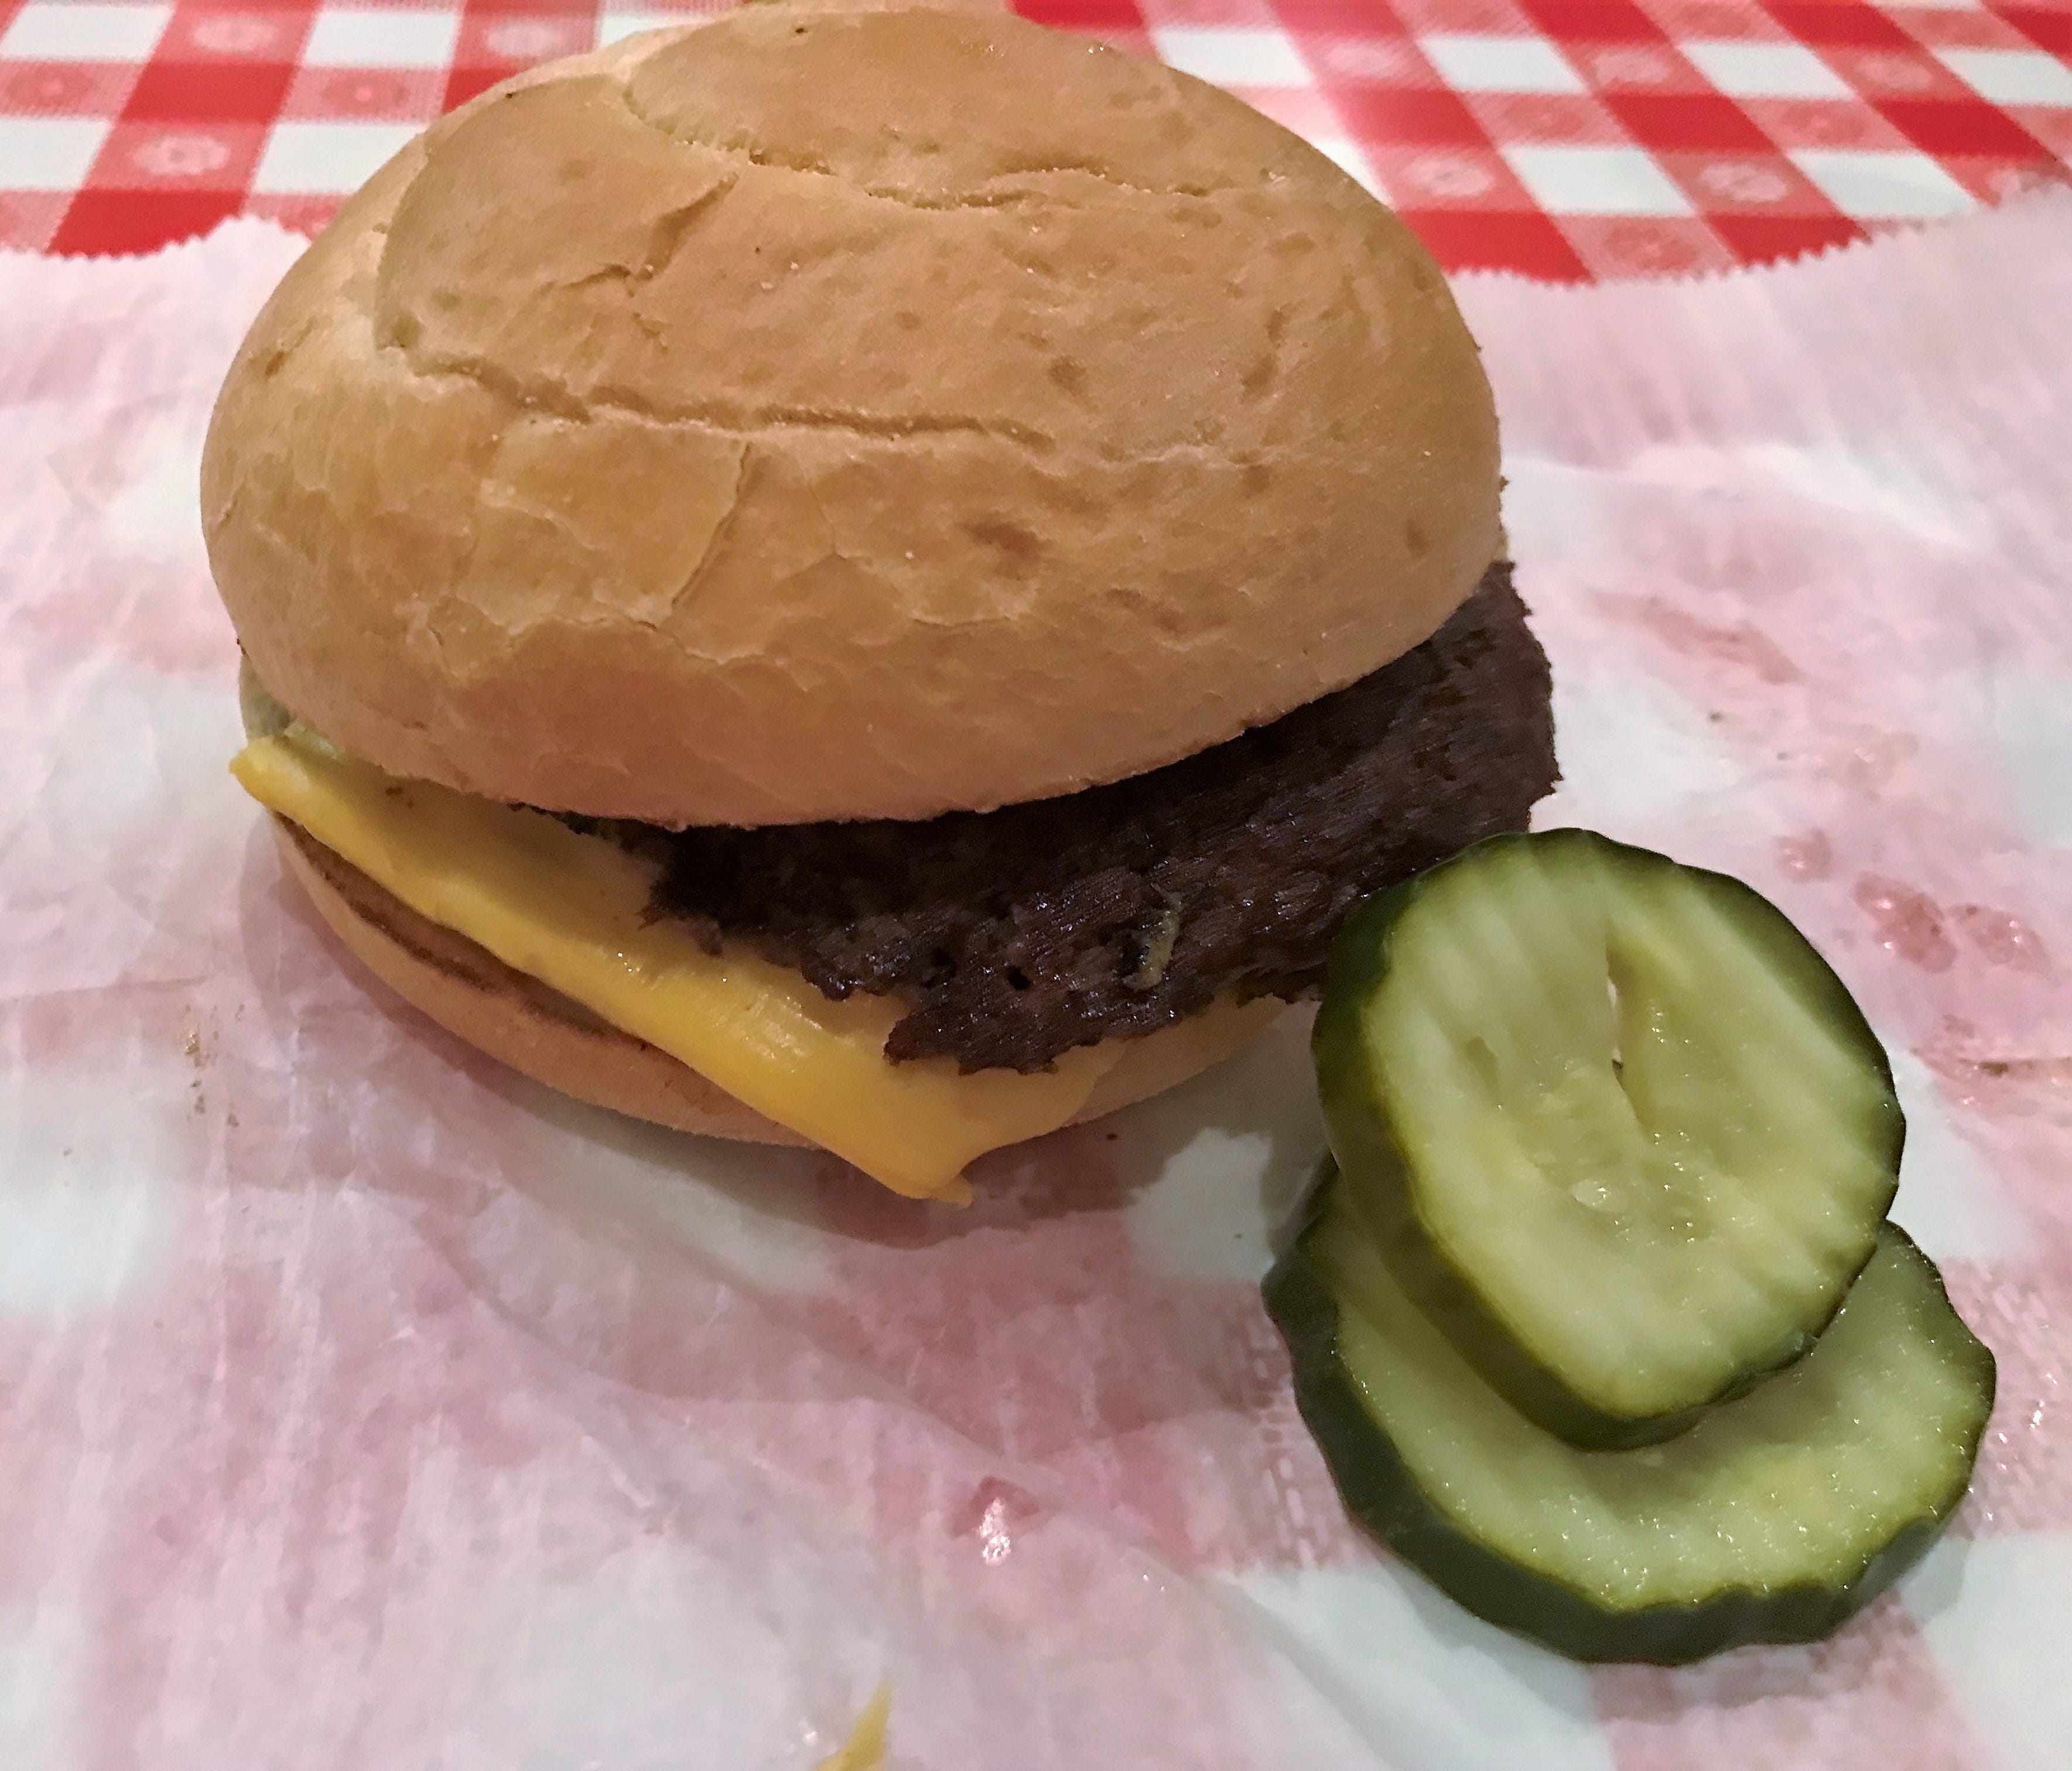 The famous signature dish is a double cheeseburger.